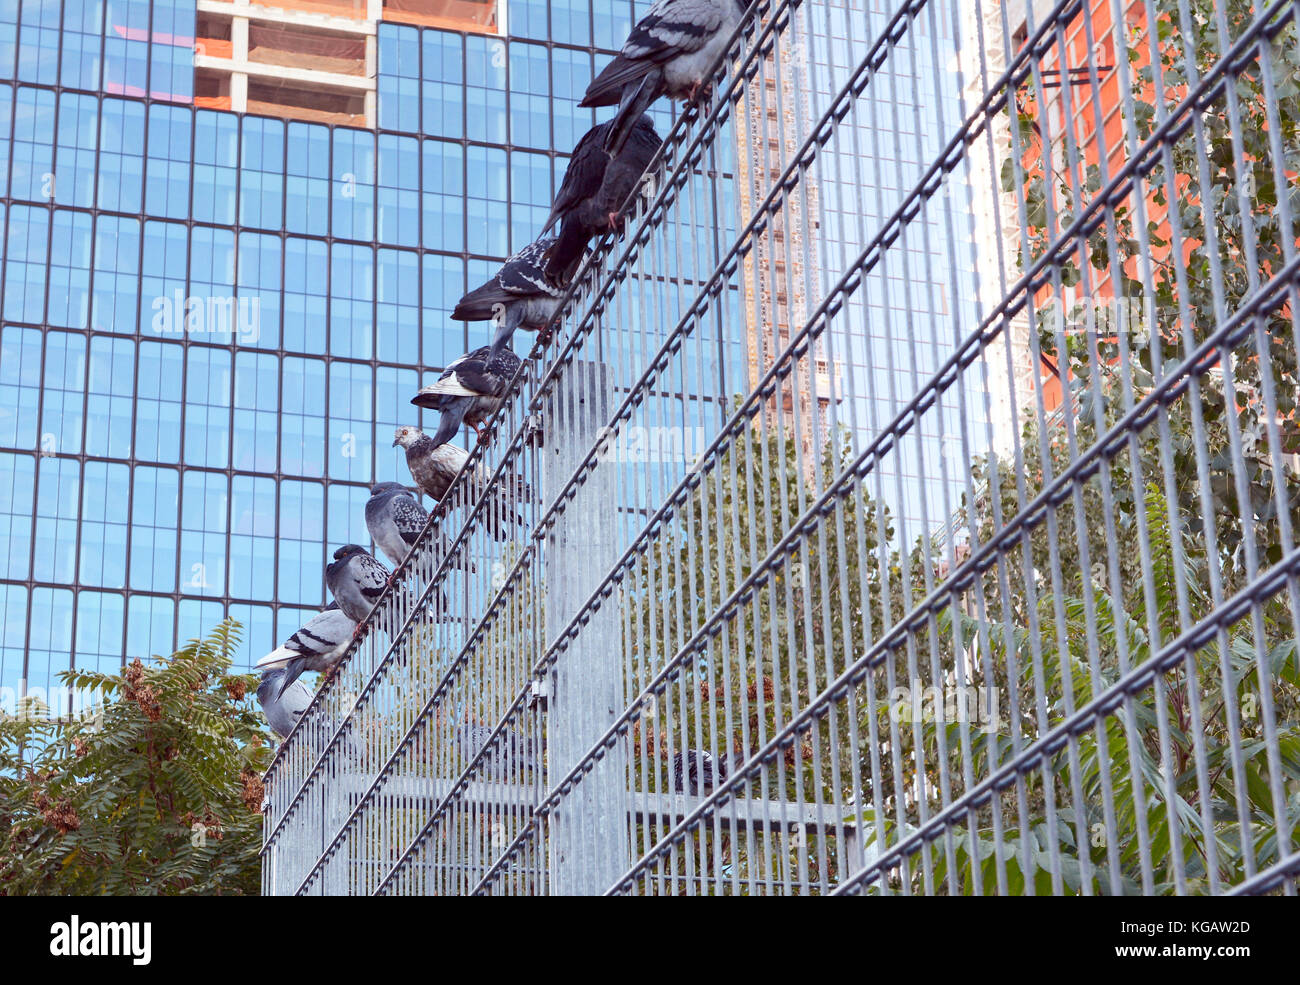 Row of nine pigeons roosting on a metal security fence in Manhattan, New York City. One bird remains alert and awake, while others sleep. Stock Photo